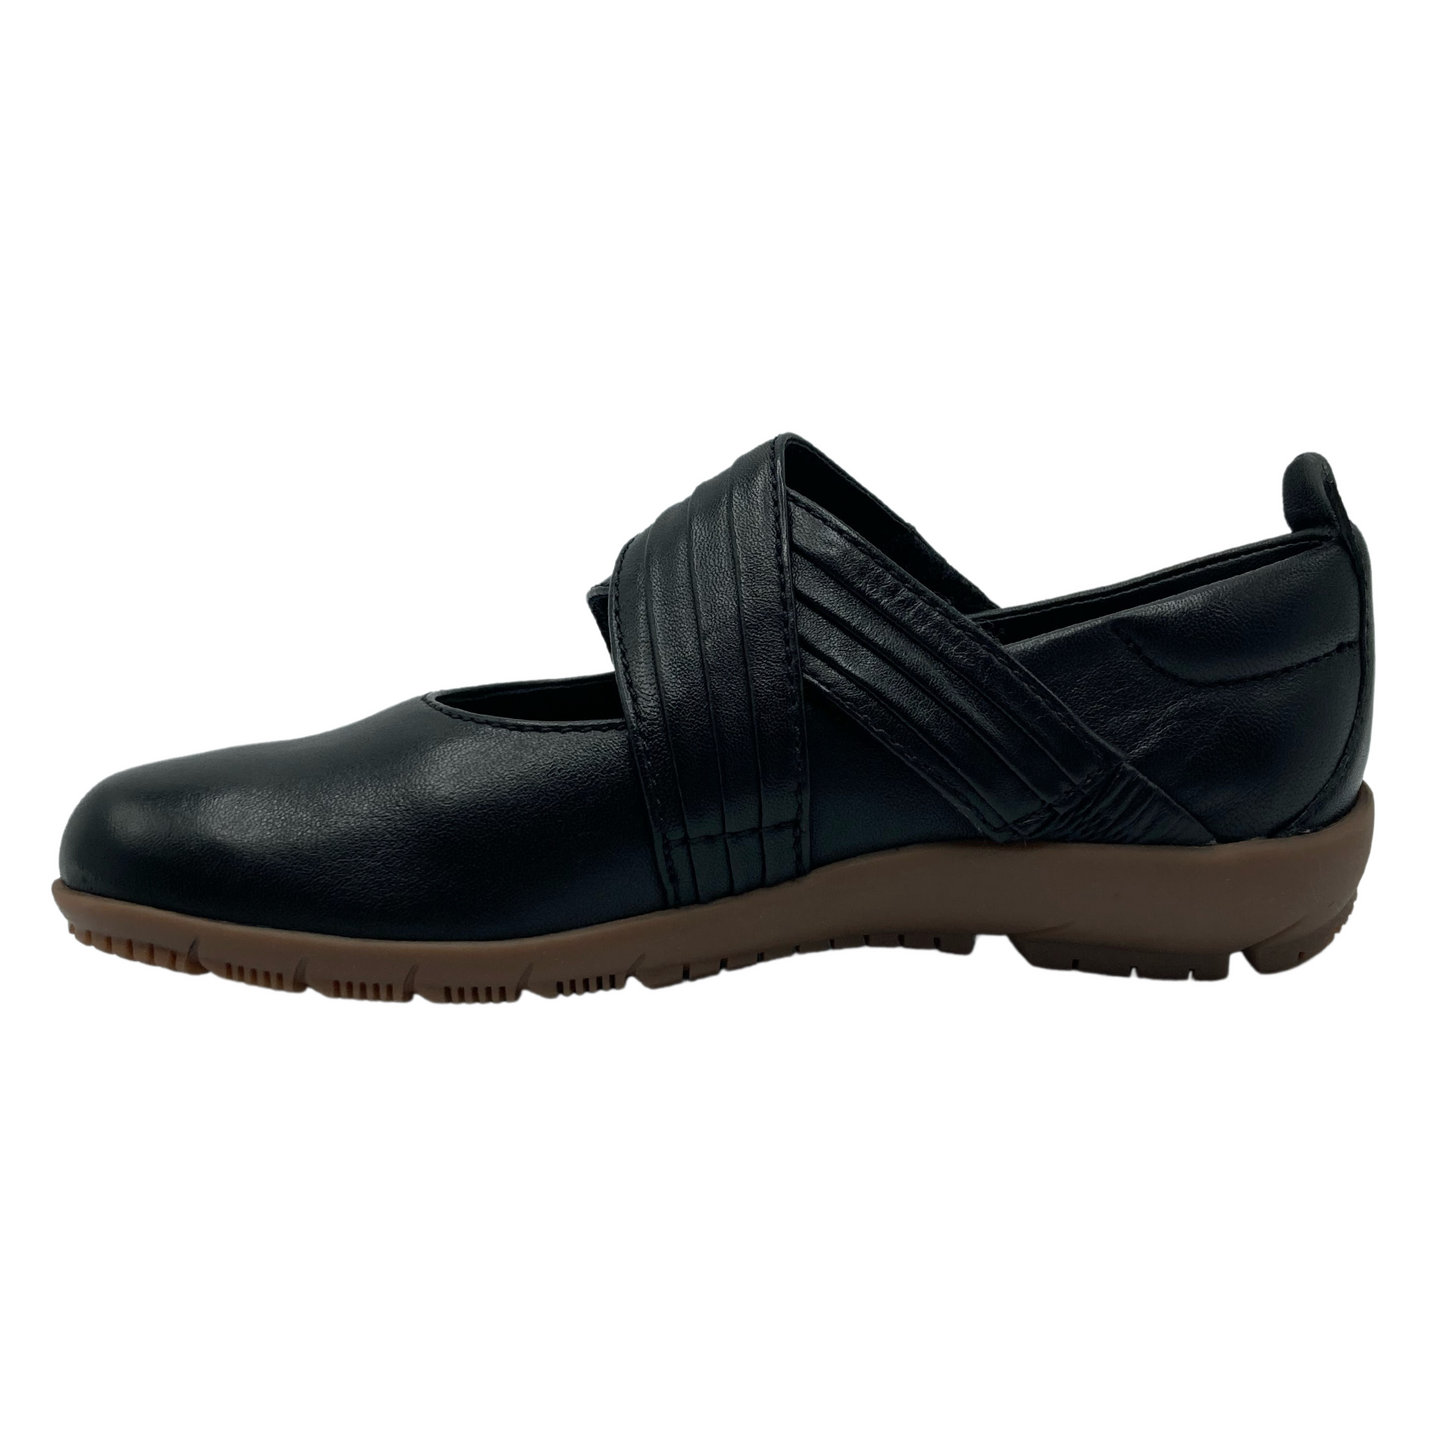 Left facing view of black leather mary jane with brown rubber outsole